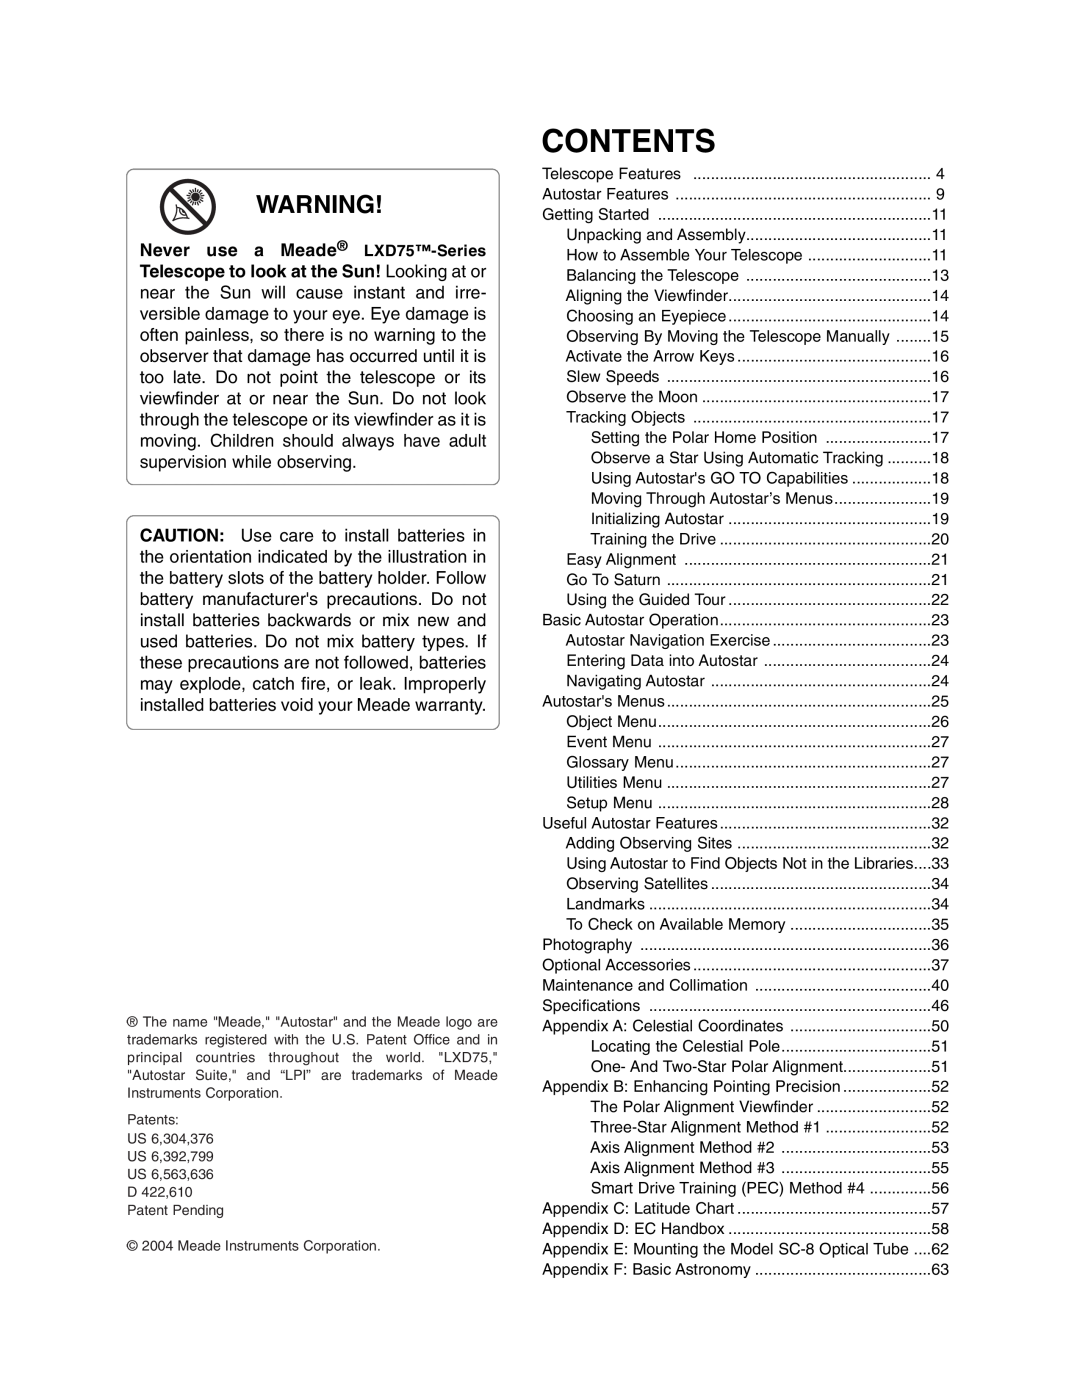 Meade LXD 75-Series instruction manual Contents 